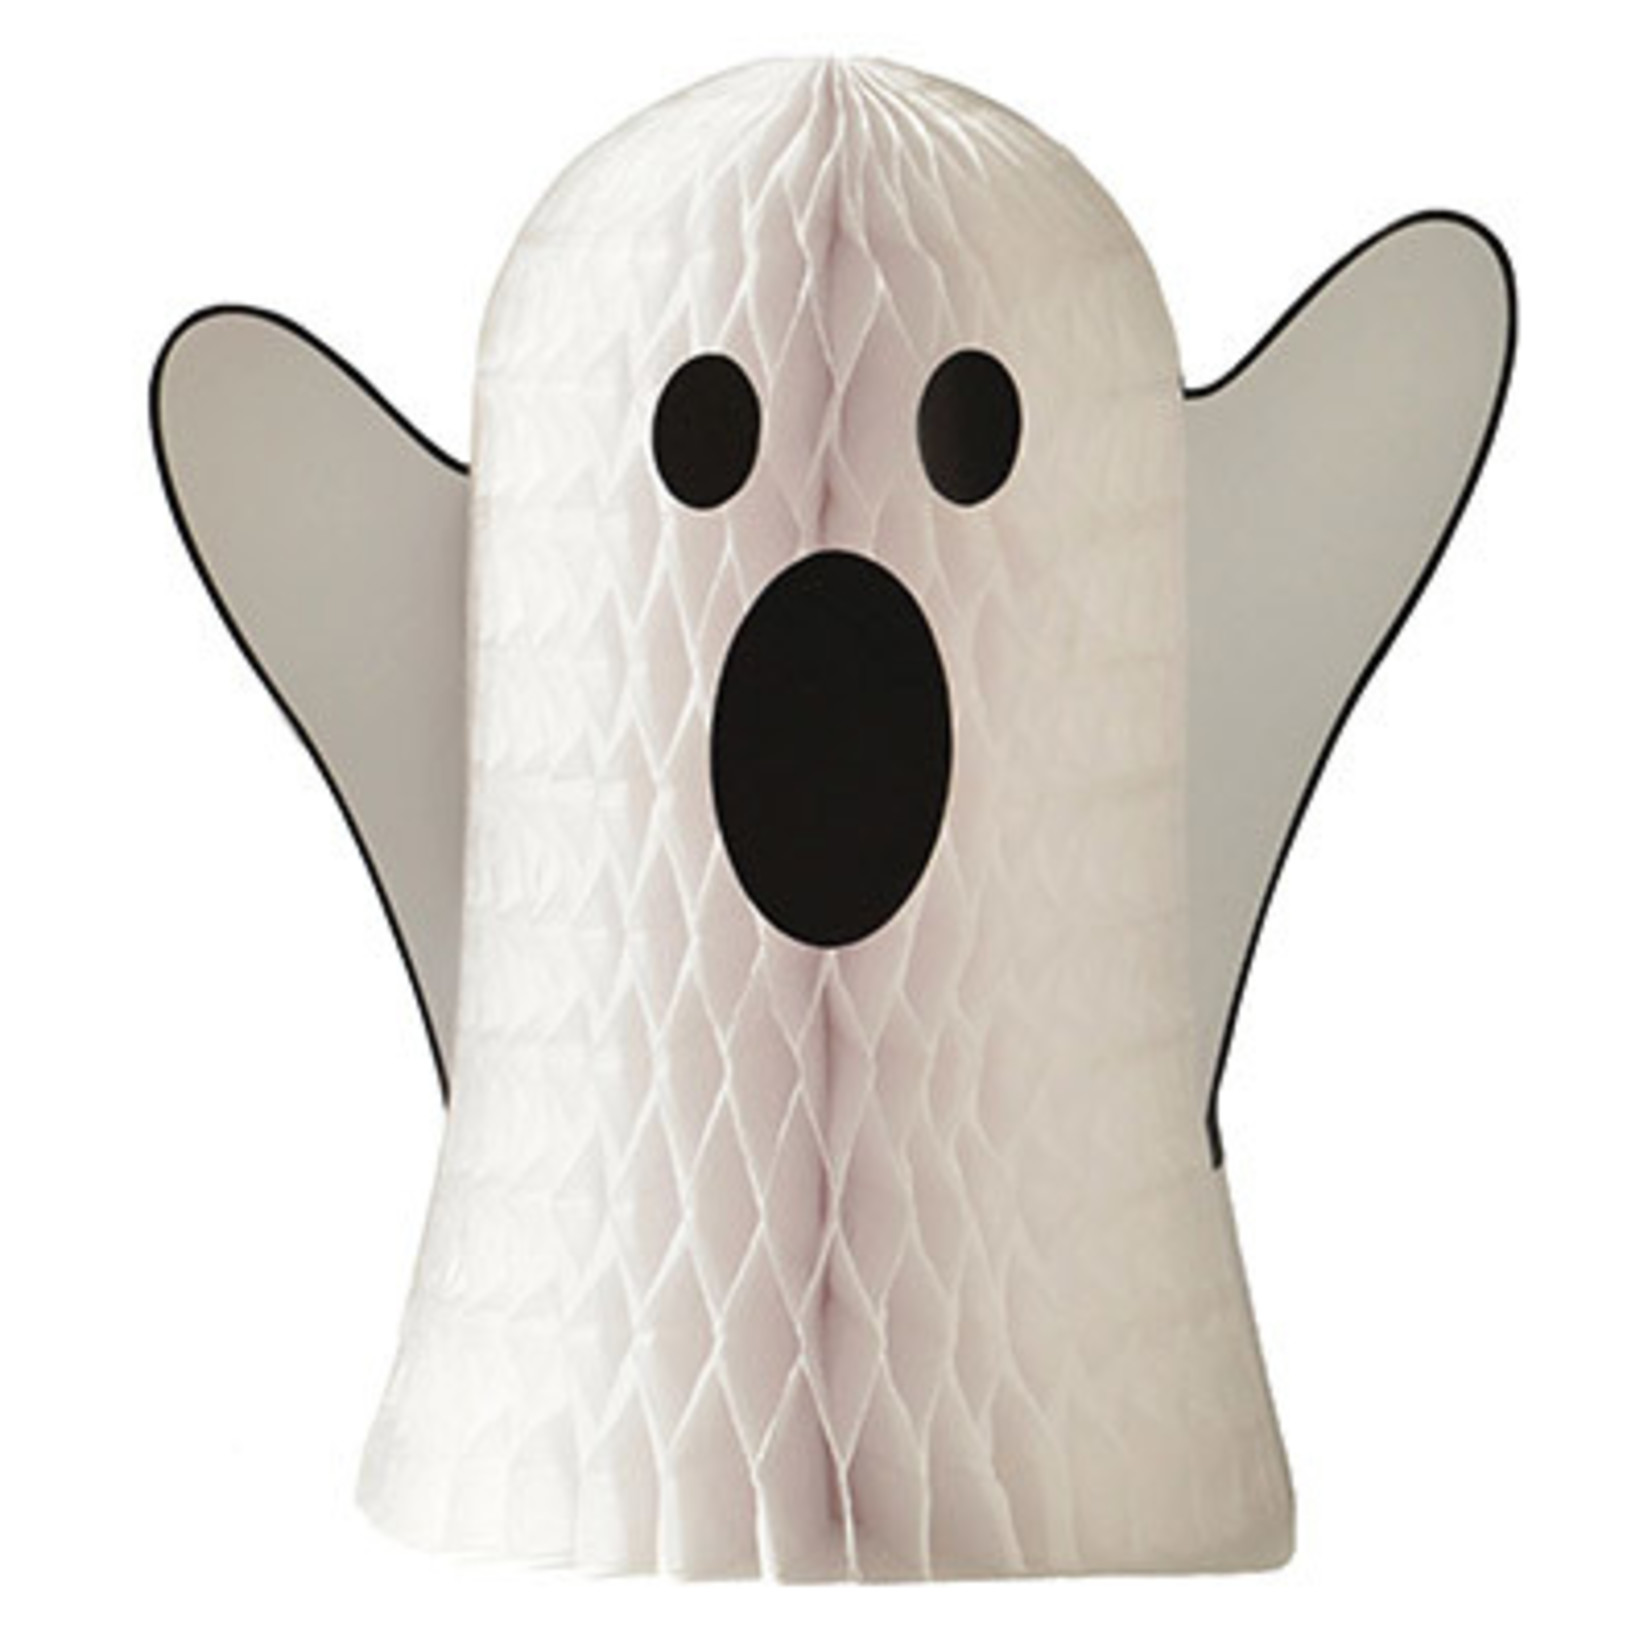 Amscan Ghost Honeycomb Centerpiece - 13.5"